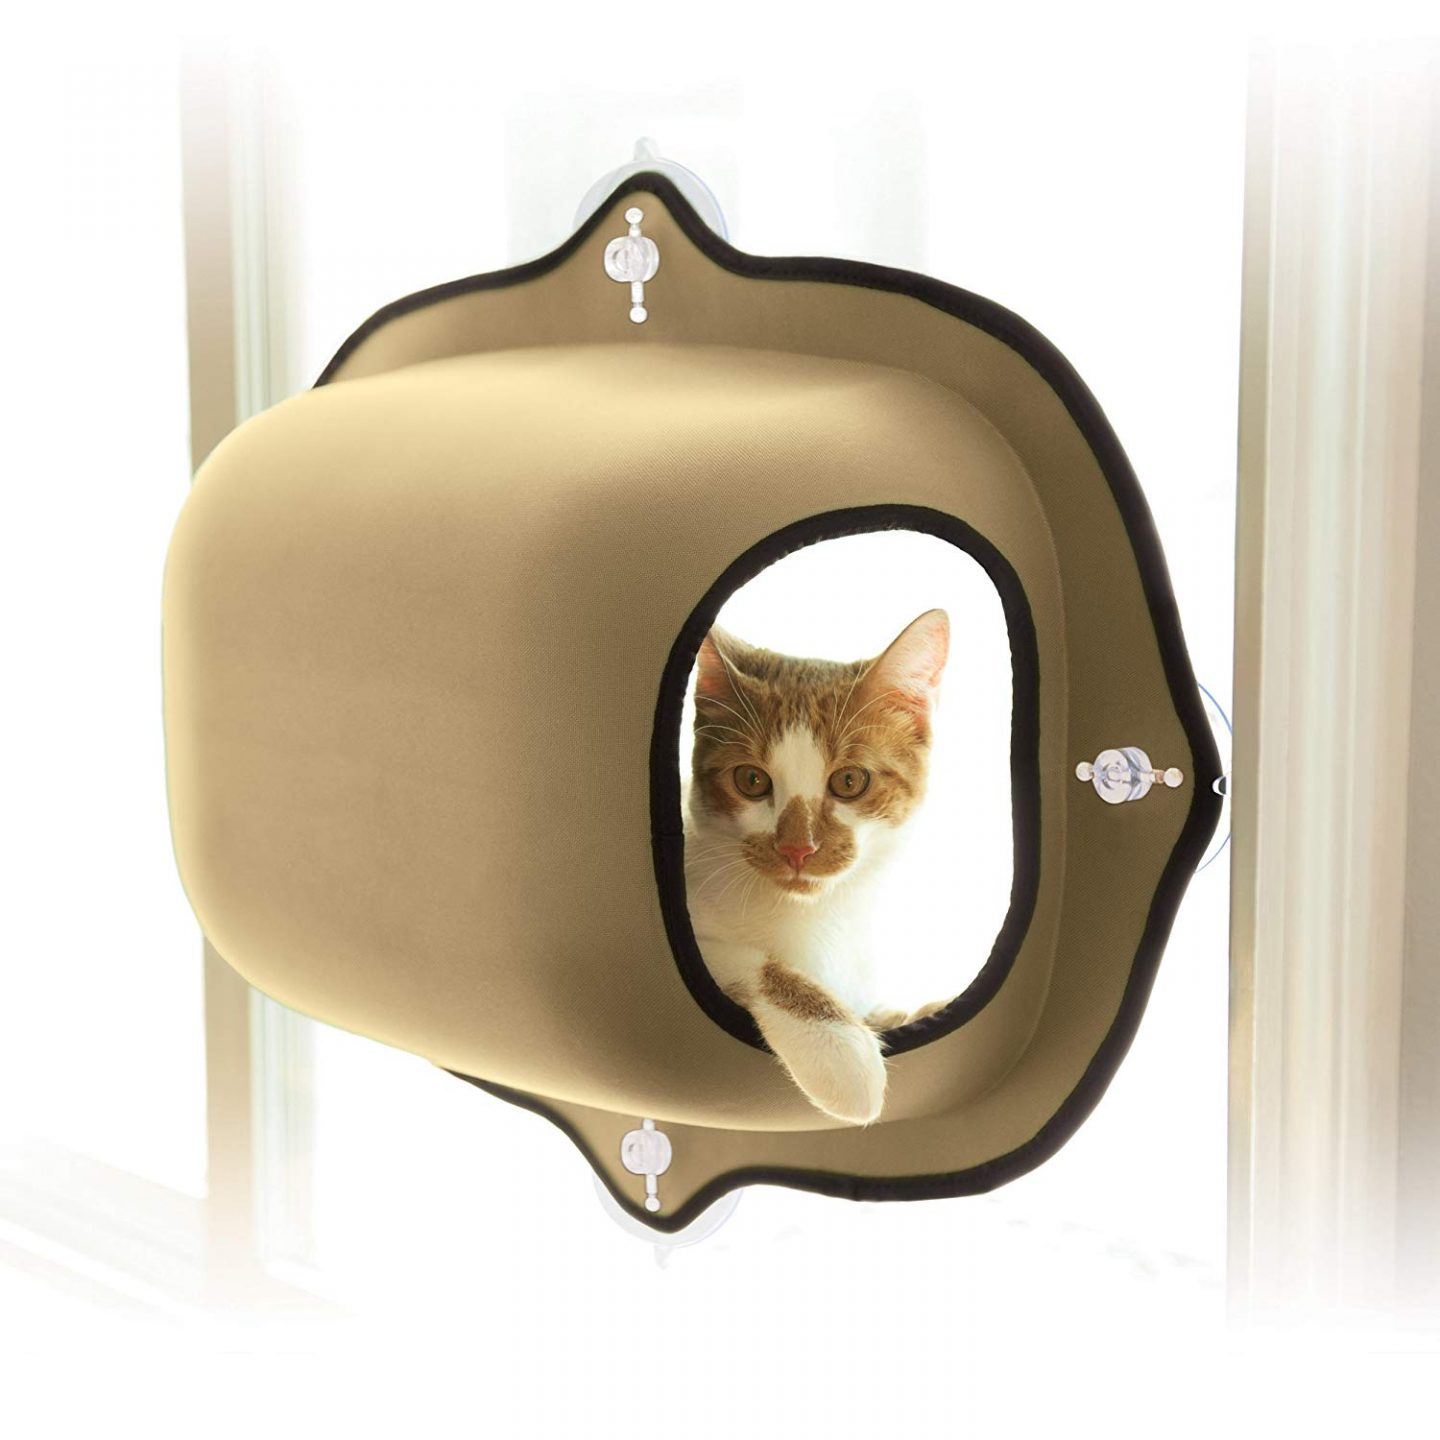 An enclosed window mounted cat pod can make all the difference in a small space.  Give your kitty a private basking area without investing in a giant cat tree.